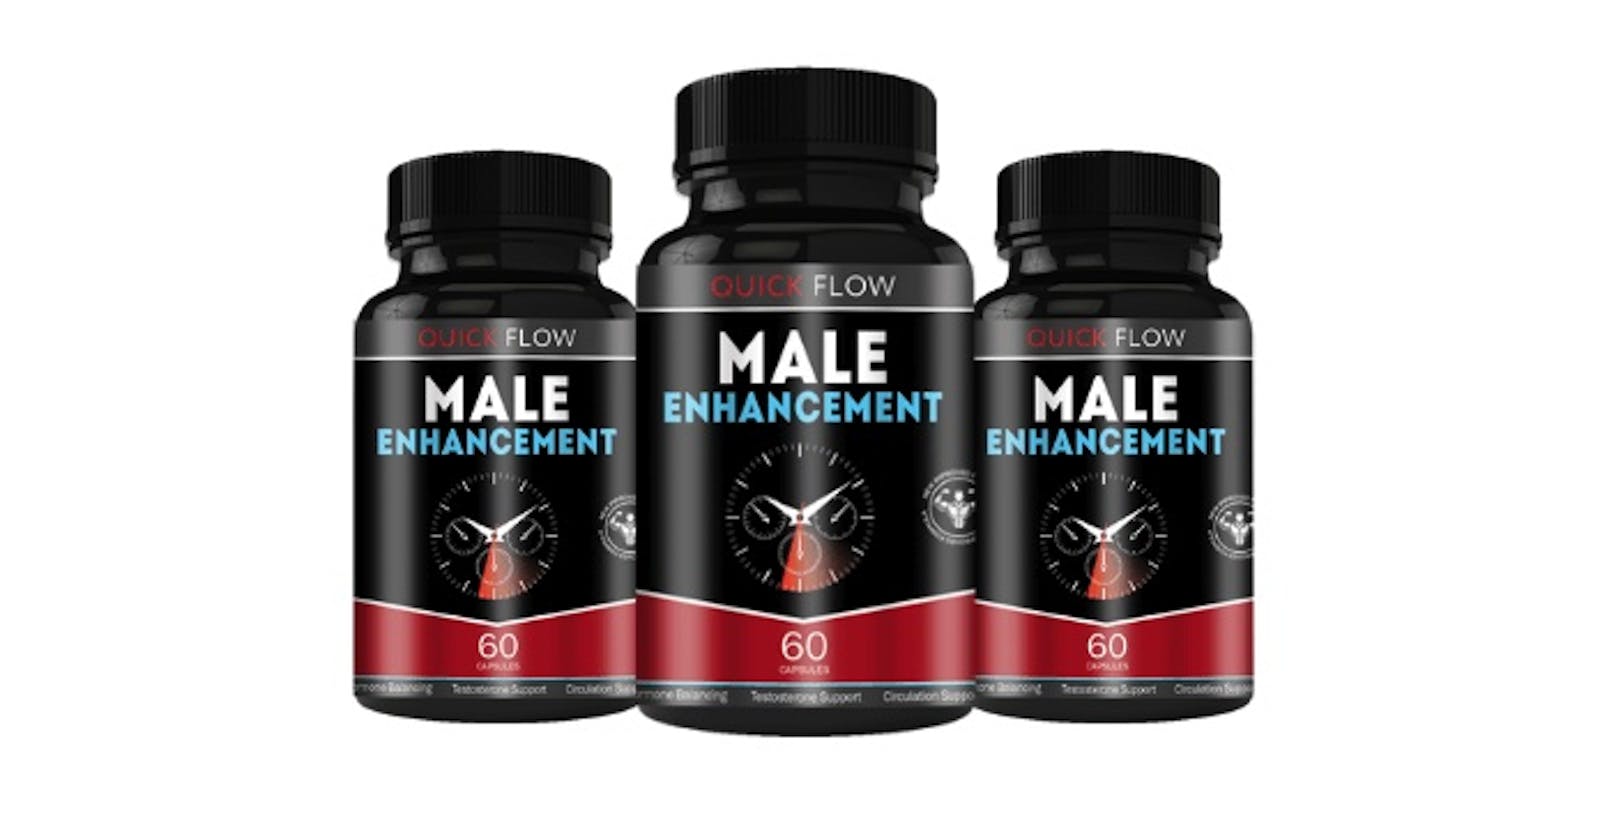 Quick Flow Male Enhancement Reviews, Results, Where To Buy? (USA)